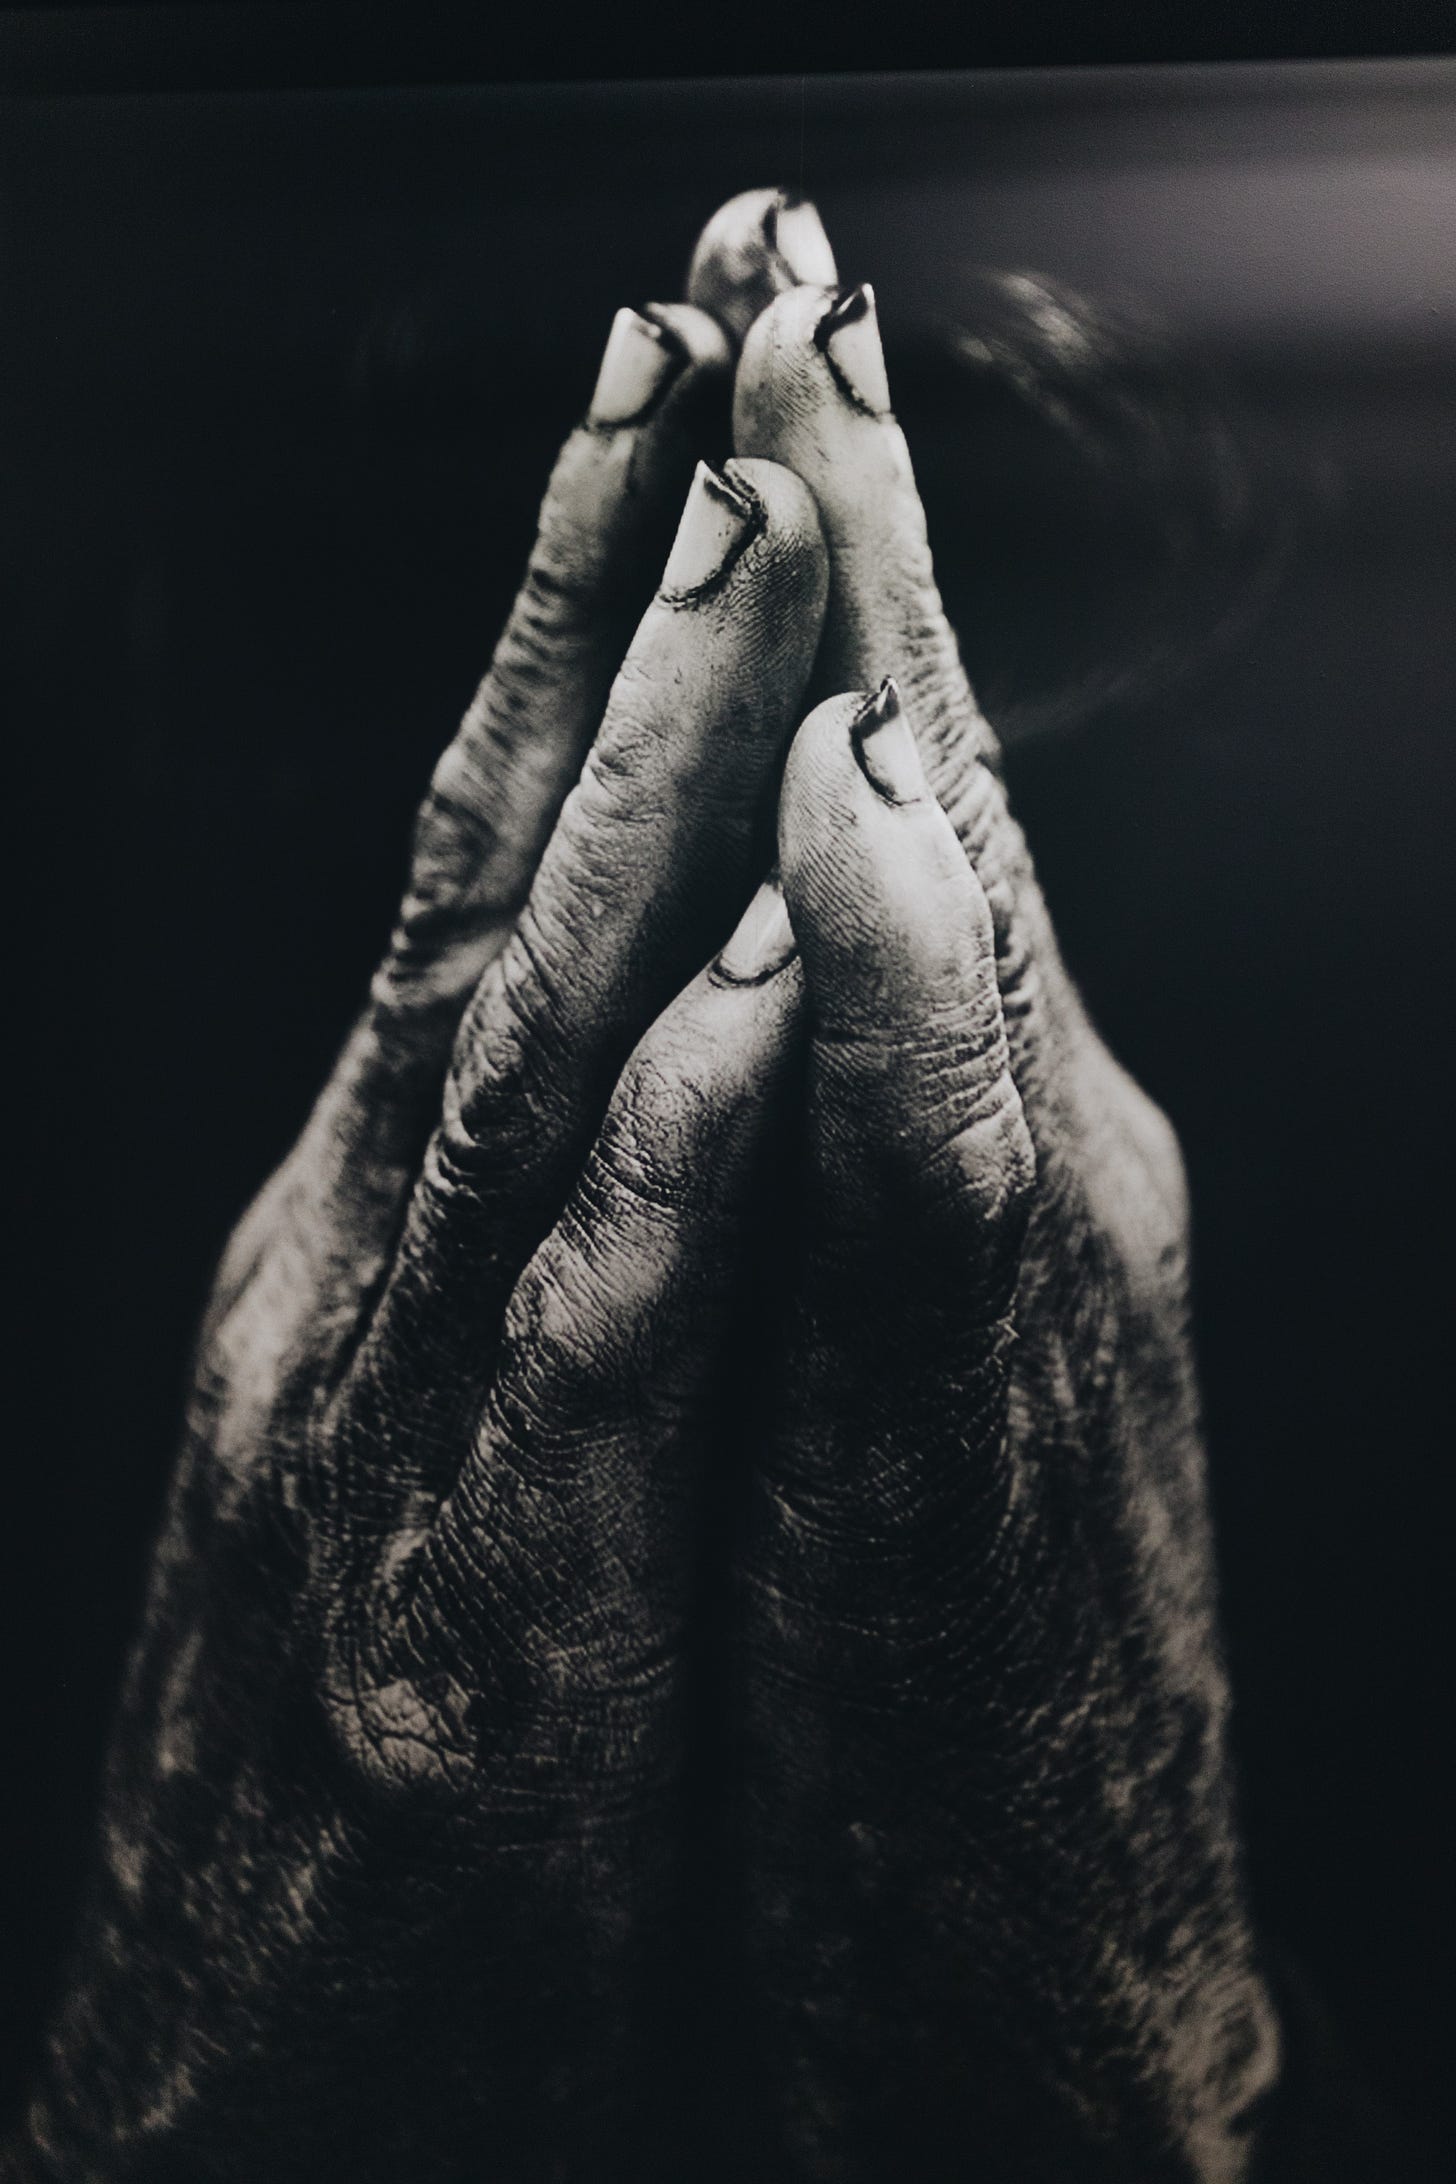 Praying hands looking worn but held together in prayer